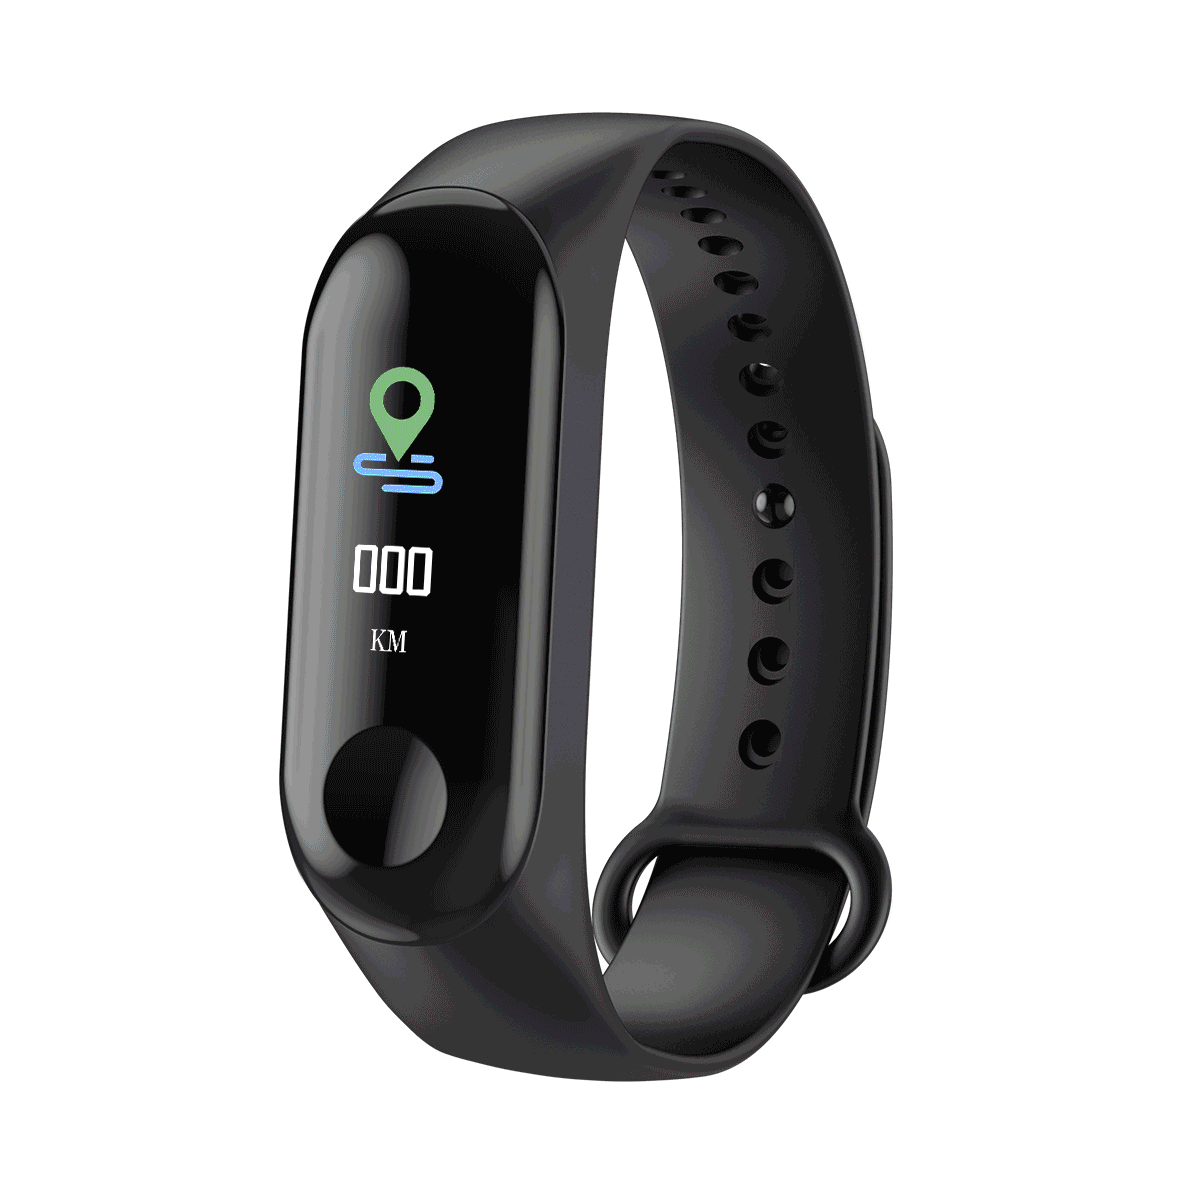 

XANES M3C 0.96" TFT Color Touch Screen IP68 Waterproof Smart Bracelet Pedometer Heart Rate Blood Pressure Monitor Fitness Smart Watch